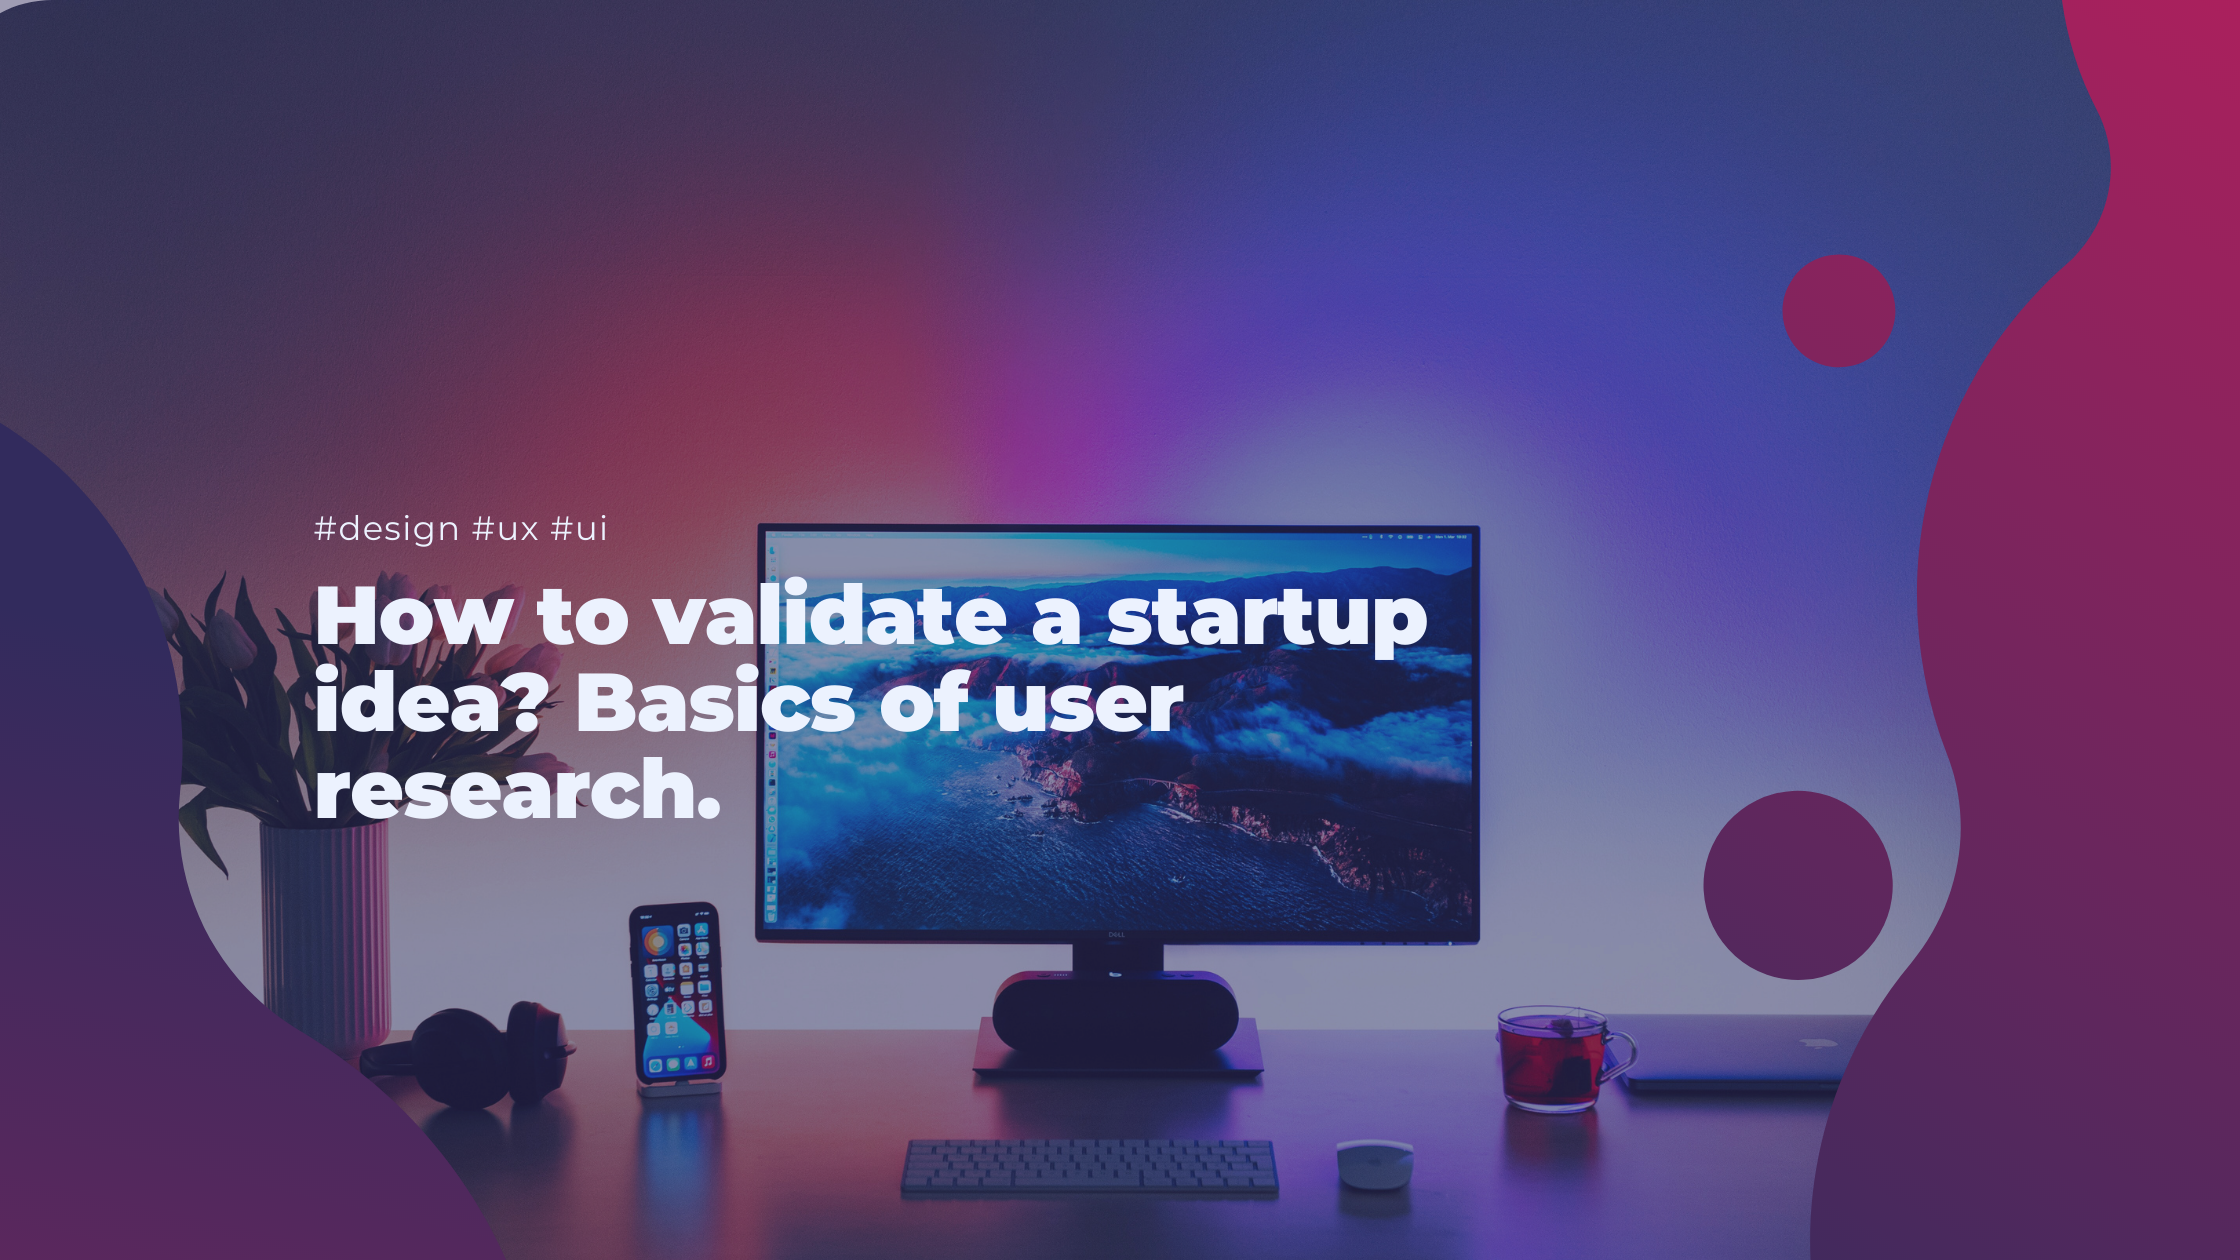 How to validate a startup idea? Basics of user research.